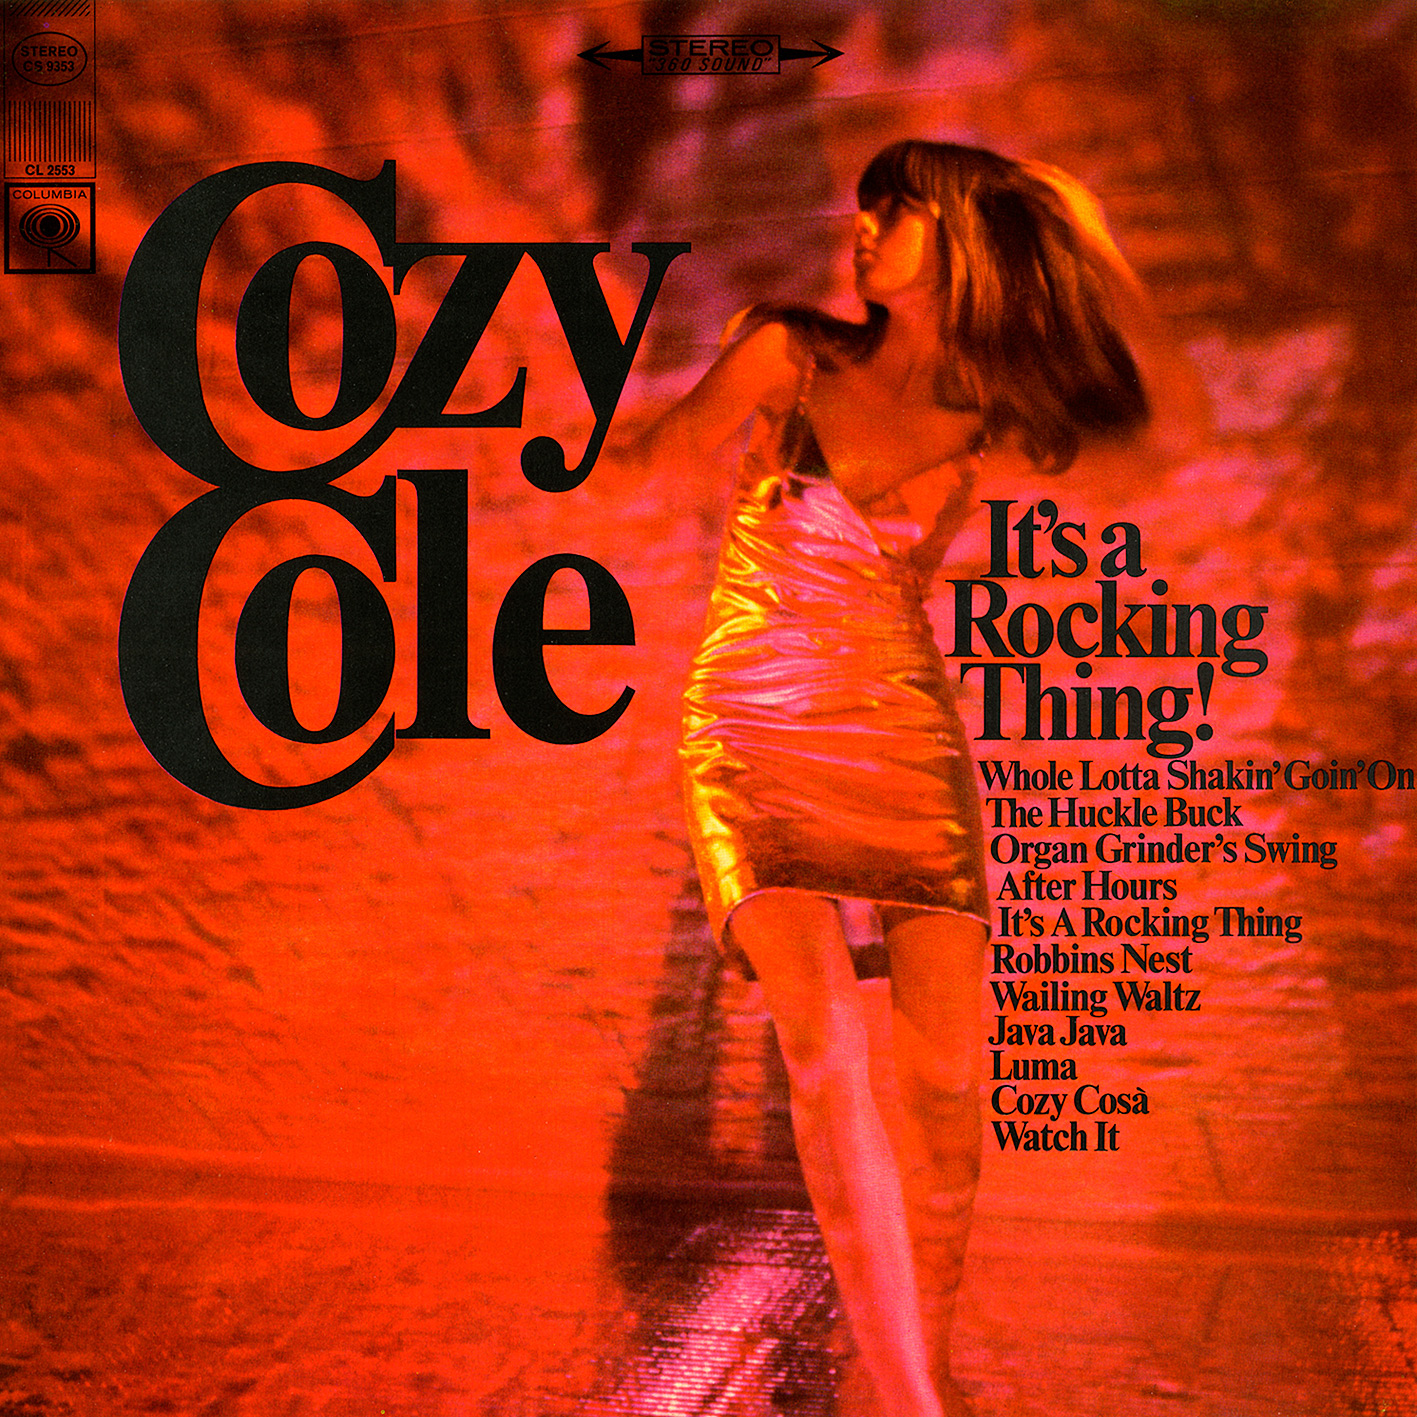 Cozy Cole – It’s A Rocking Thing (1966/2016) [HDTracks FLAC 24bit/192kHz]